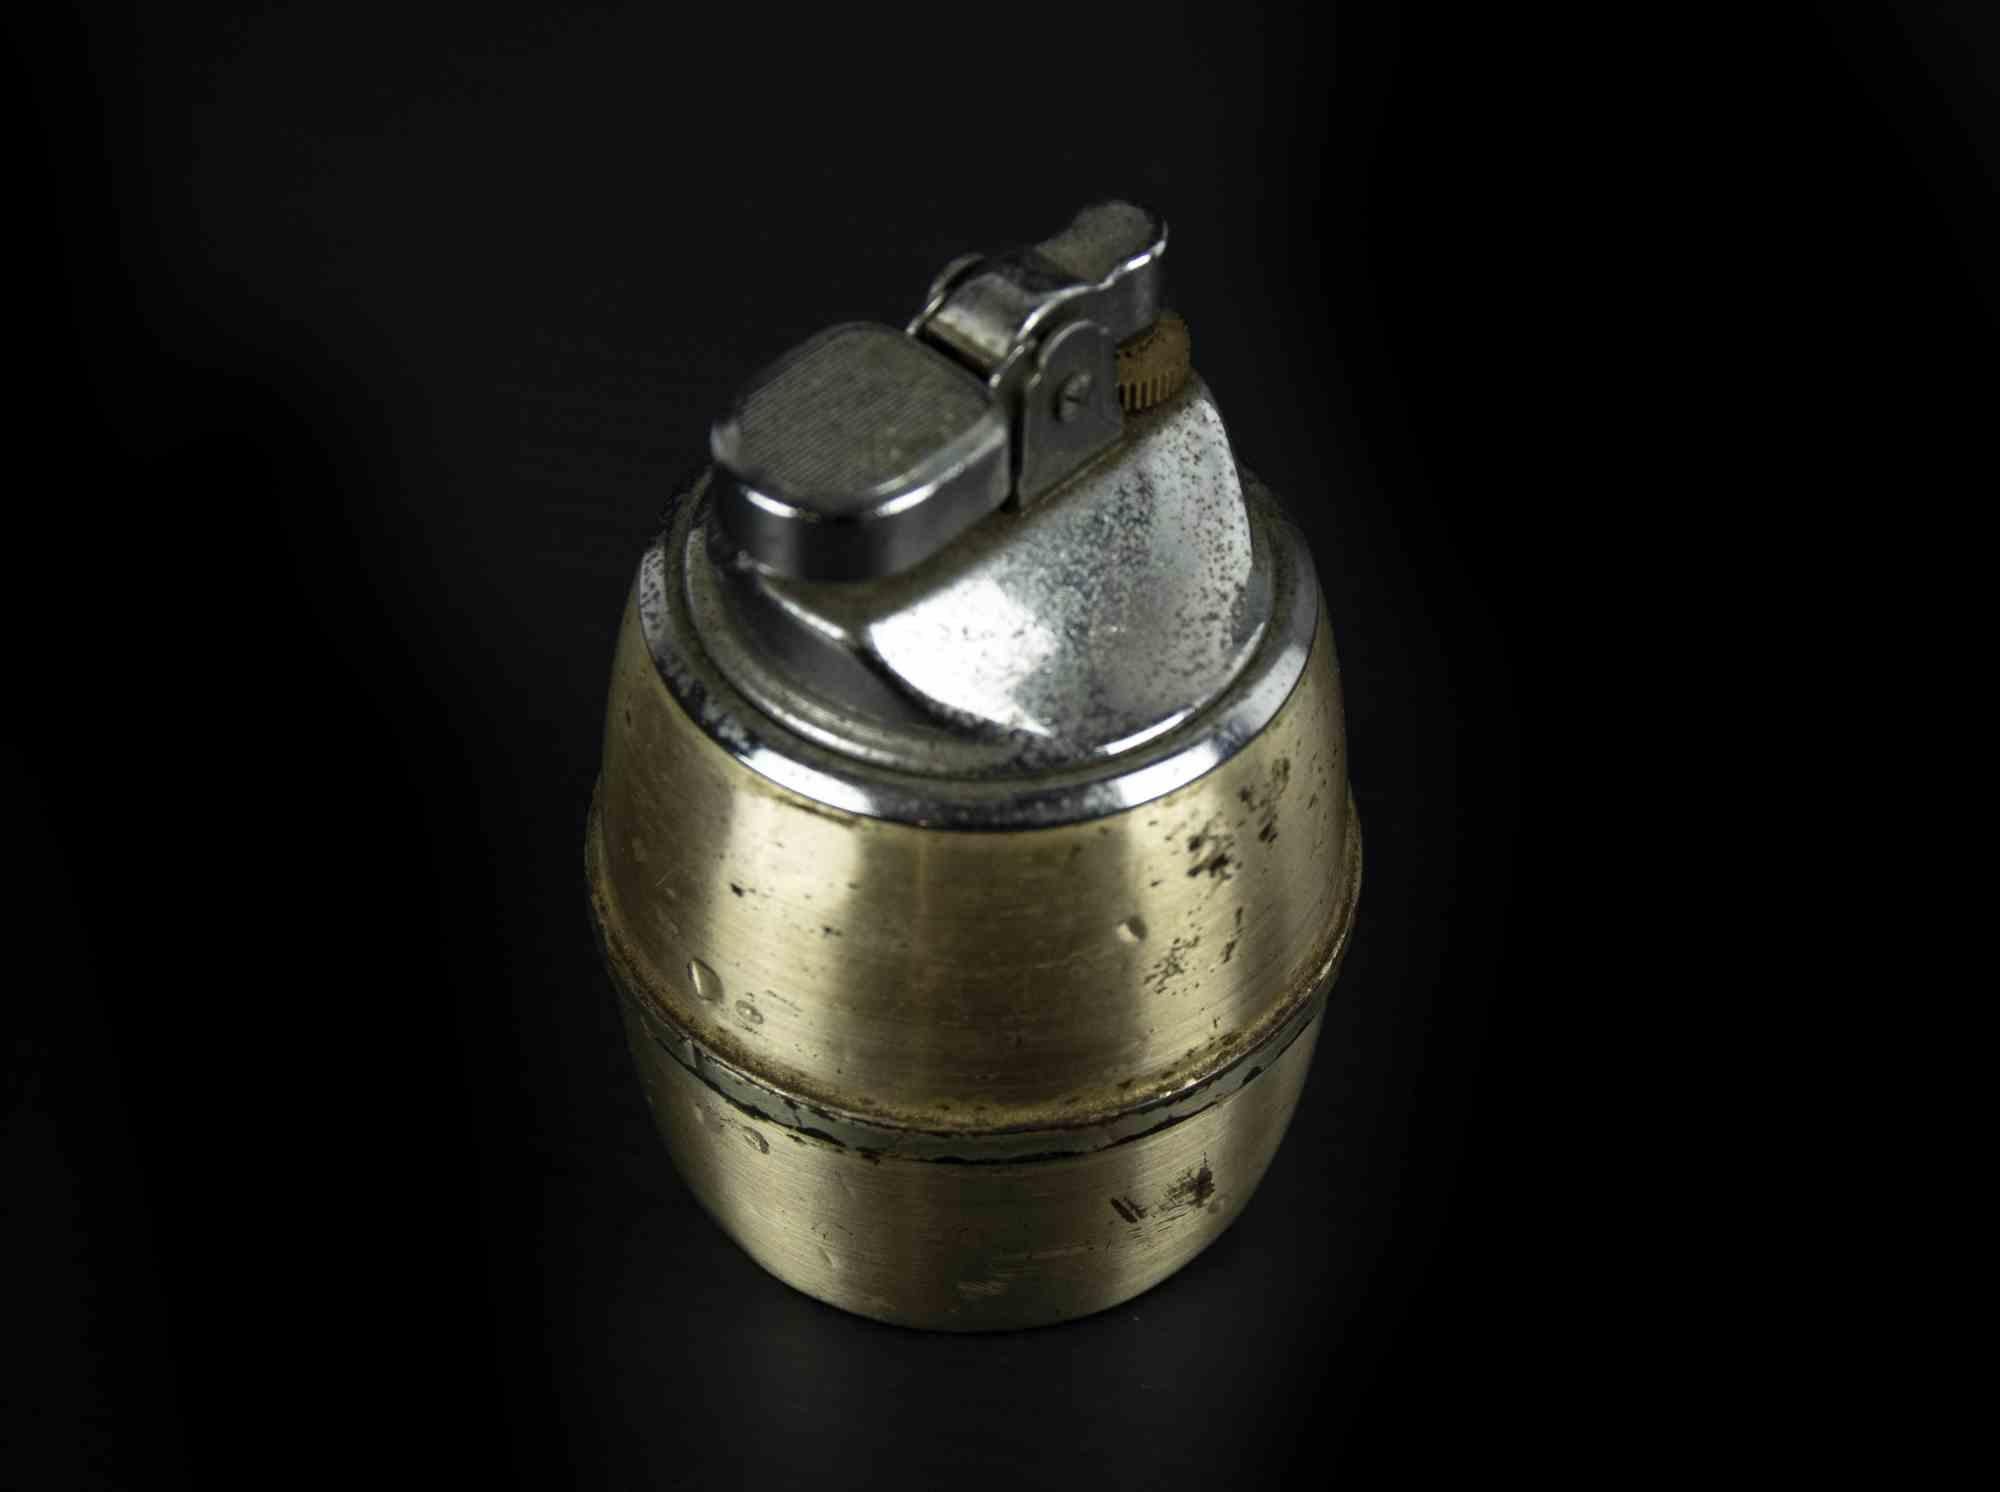 Vintage brass and metal lighter is an original decorative object realized in the mid-20th century.

A metal vintage ashtray perfect to enjoy relax moment.

Produced by Jewelry Gallazzi in Ancona, Italy.

Good conditions (signs of age and wear).